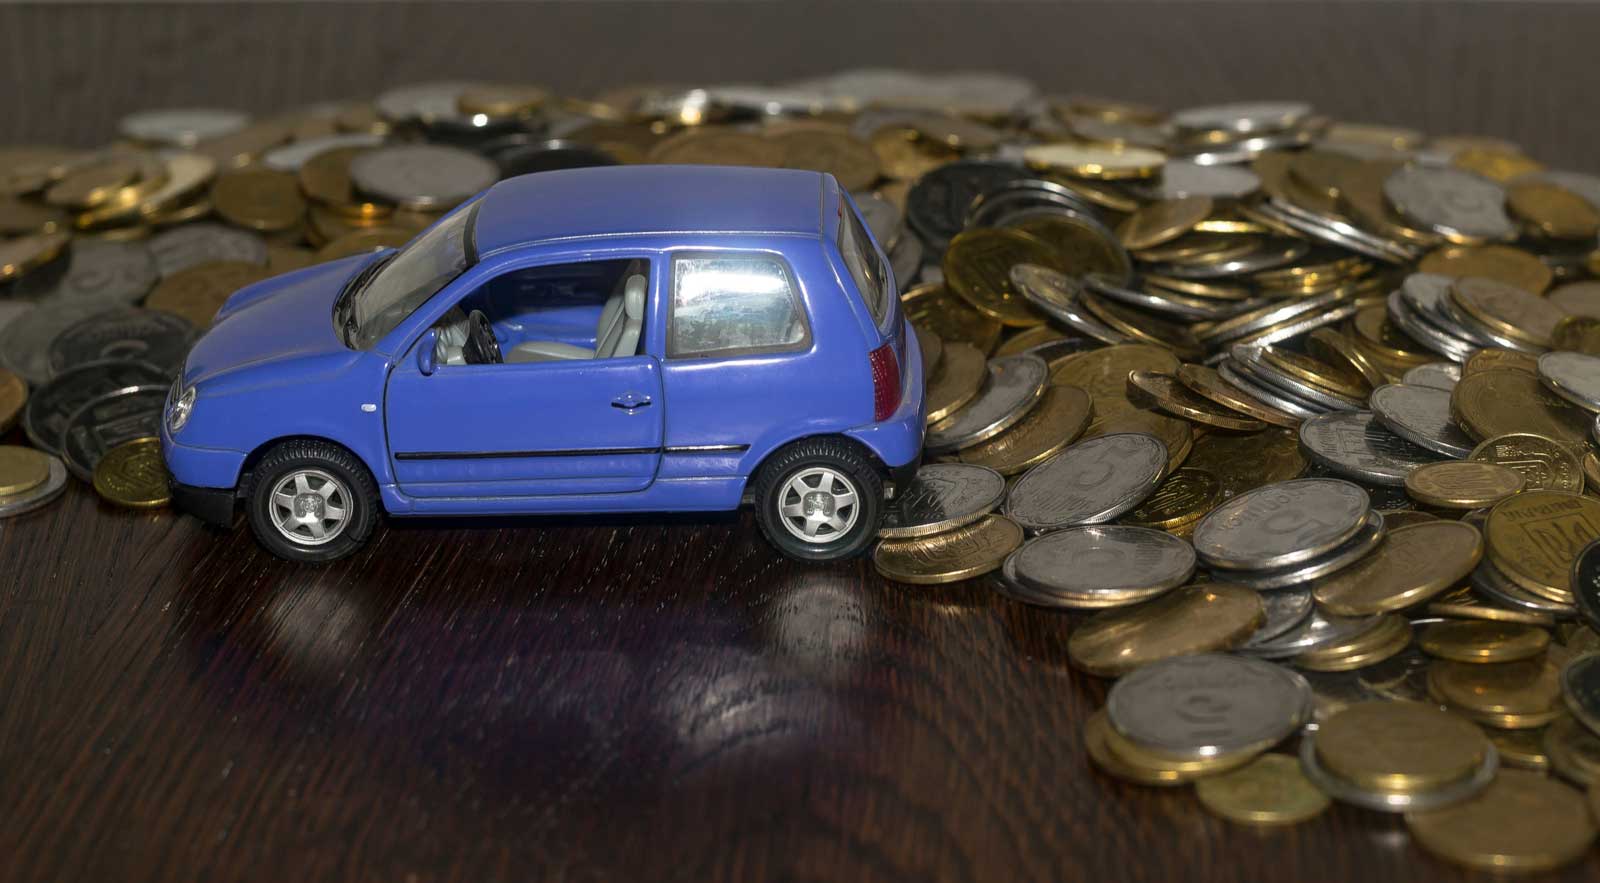 Need a Car: Can My Wife Contribute to the Loan Payments?